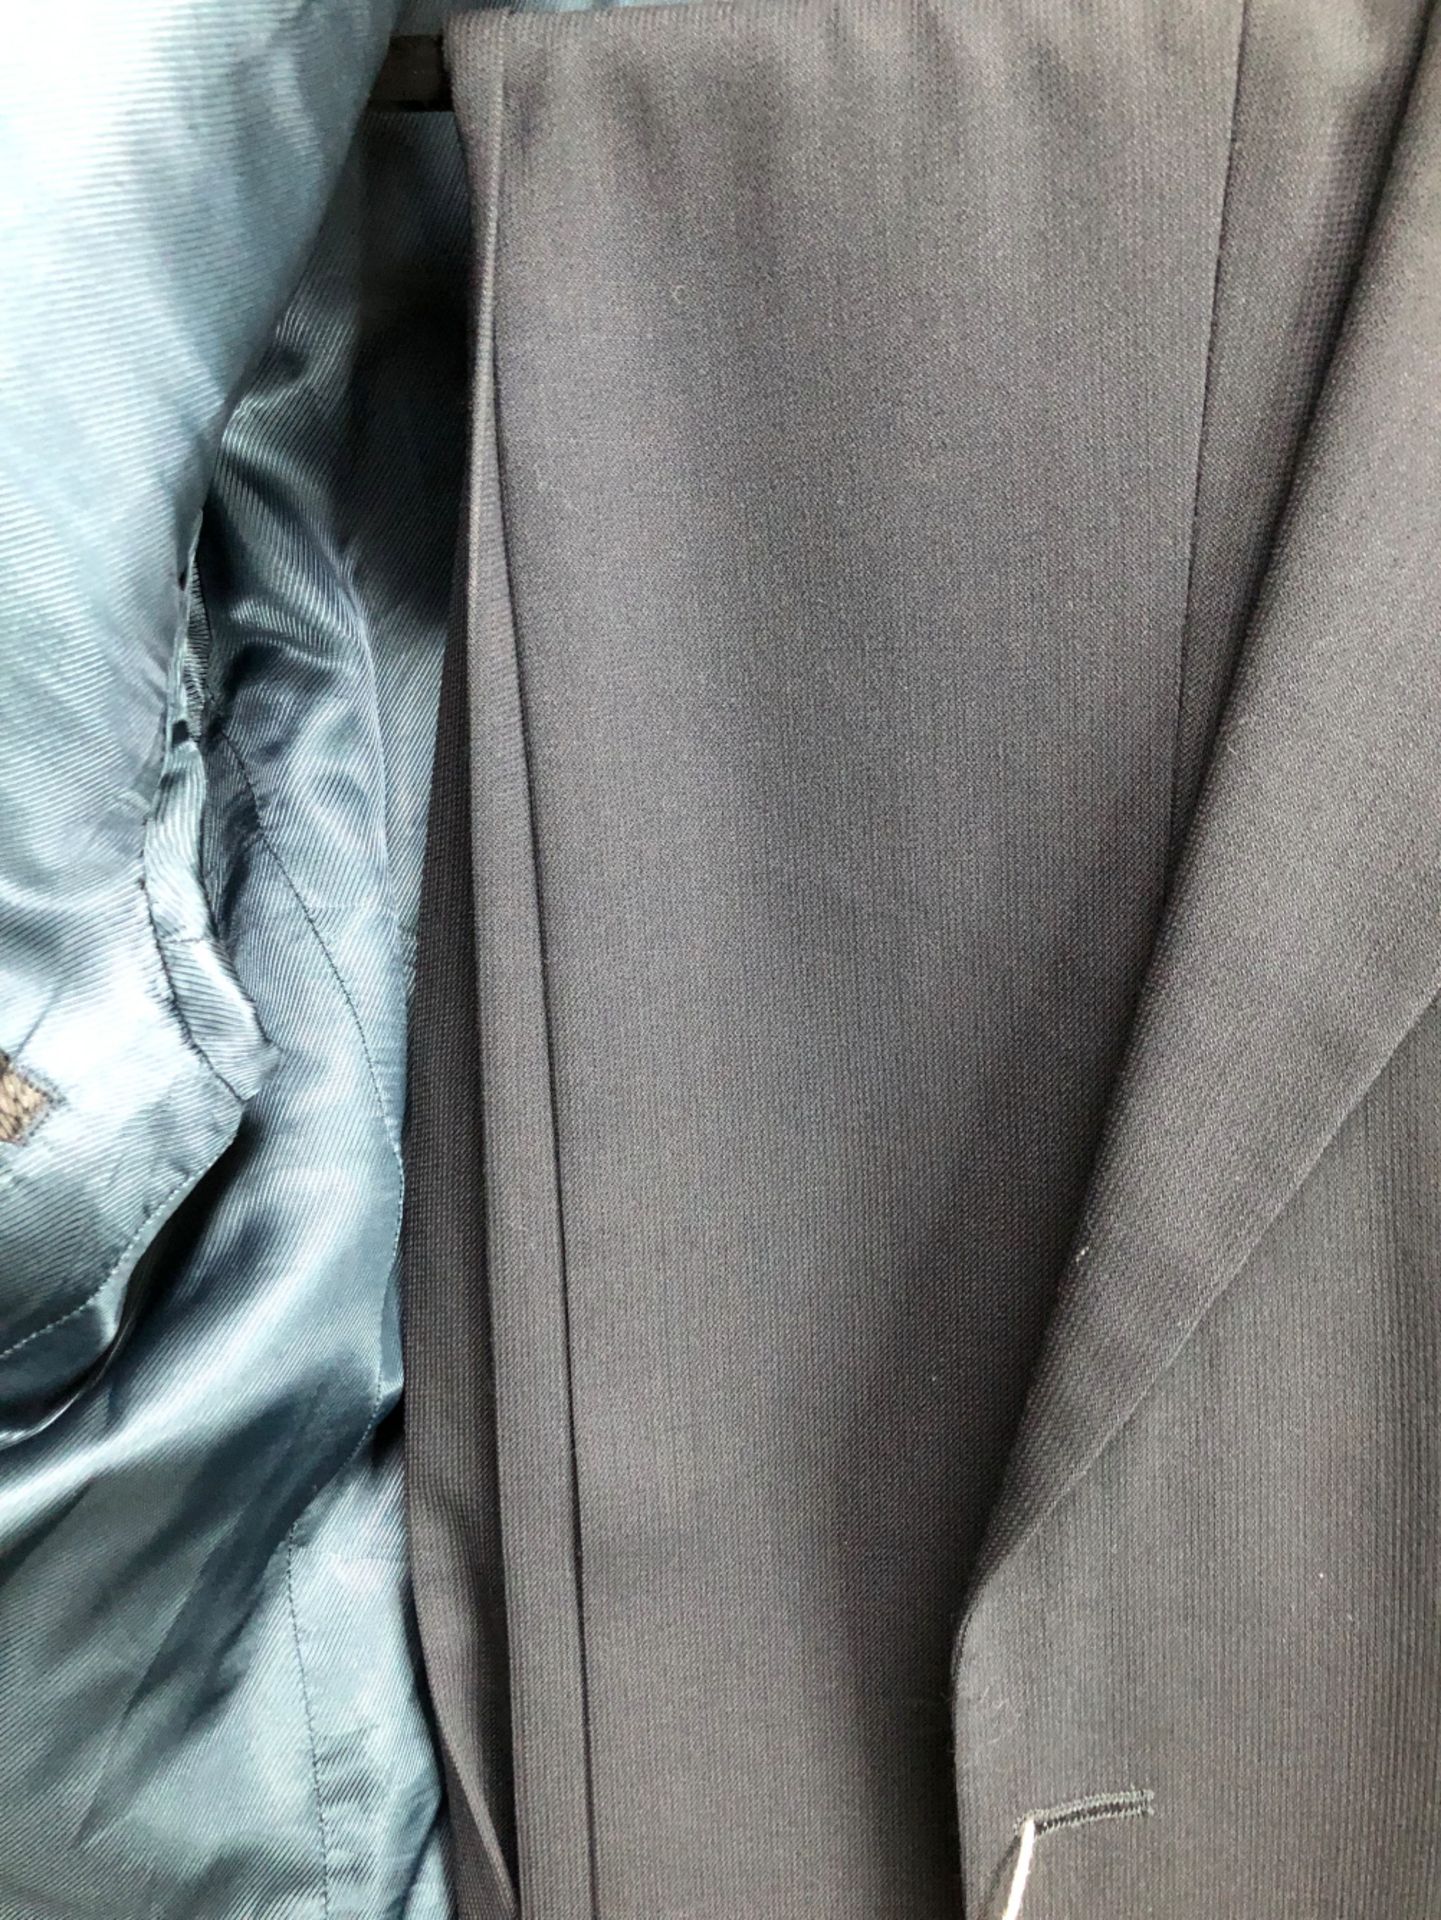 GENTS SUIT: MARKS AND SPENCER, BLACK, CHEST 42, WAIST 36, INSIDE LEG 29, TOGETHER WITH GENTS JACKET: - Image 4 of 7